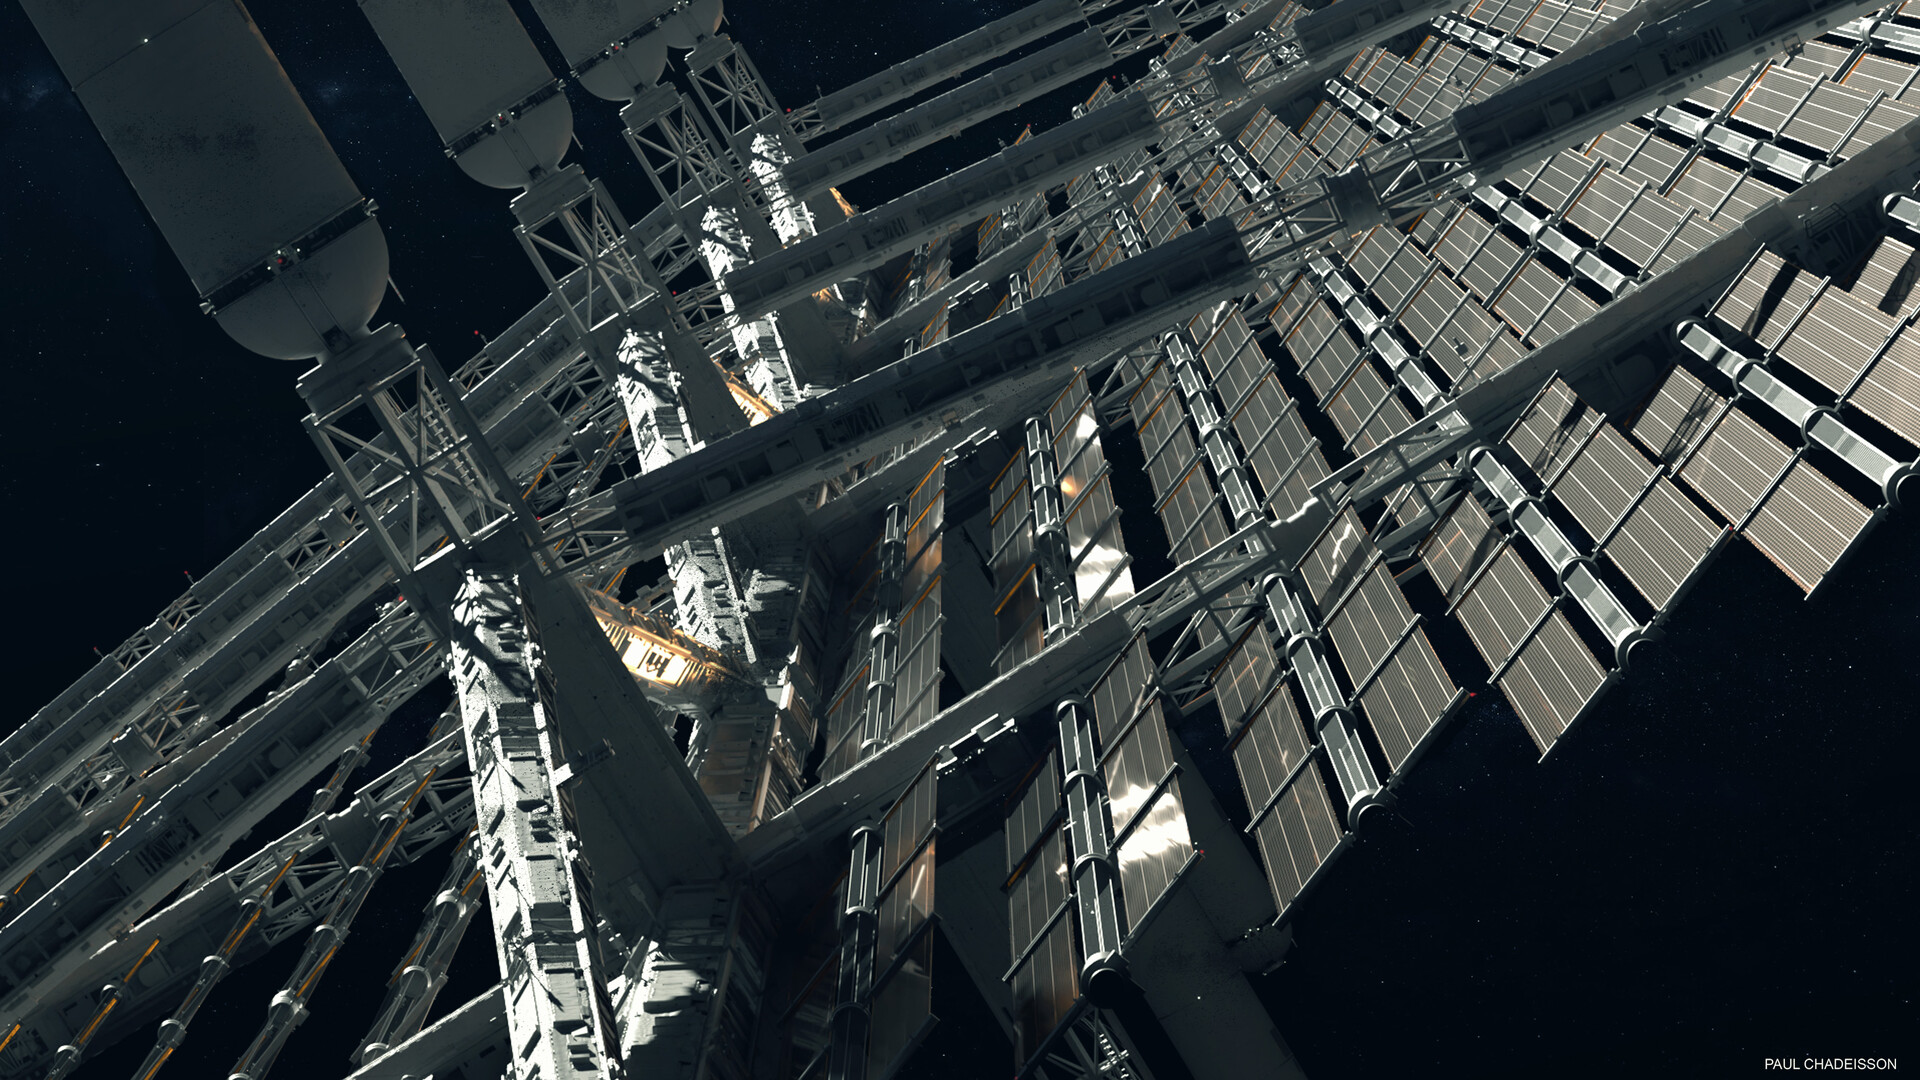 Paul Chadeisson Science Fiction Render Space Space Art Space Station Digital Art 1920x1080